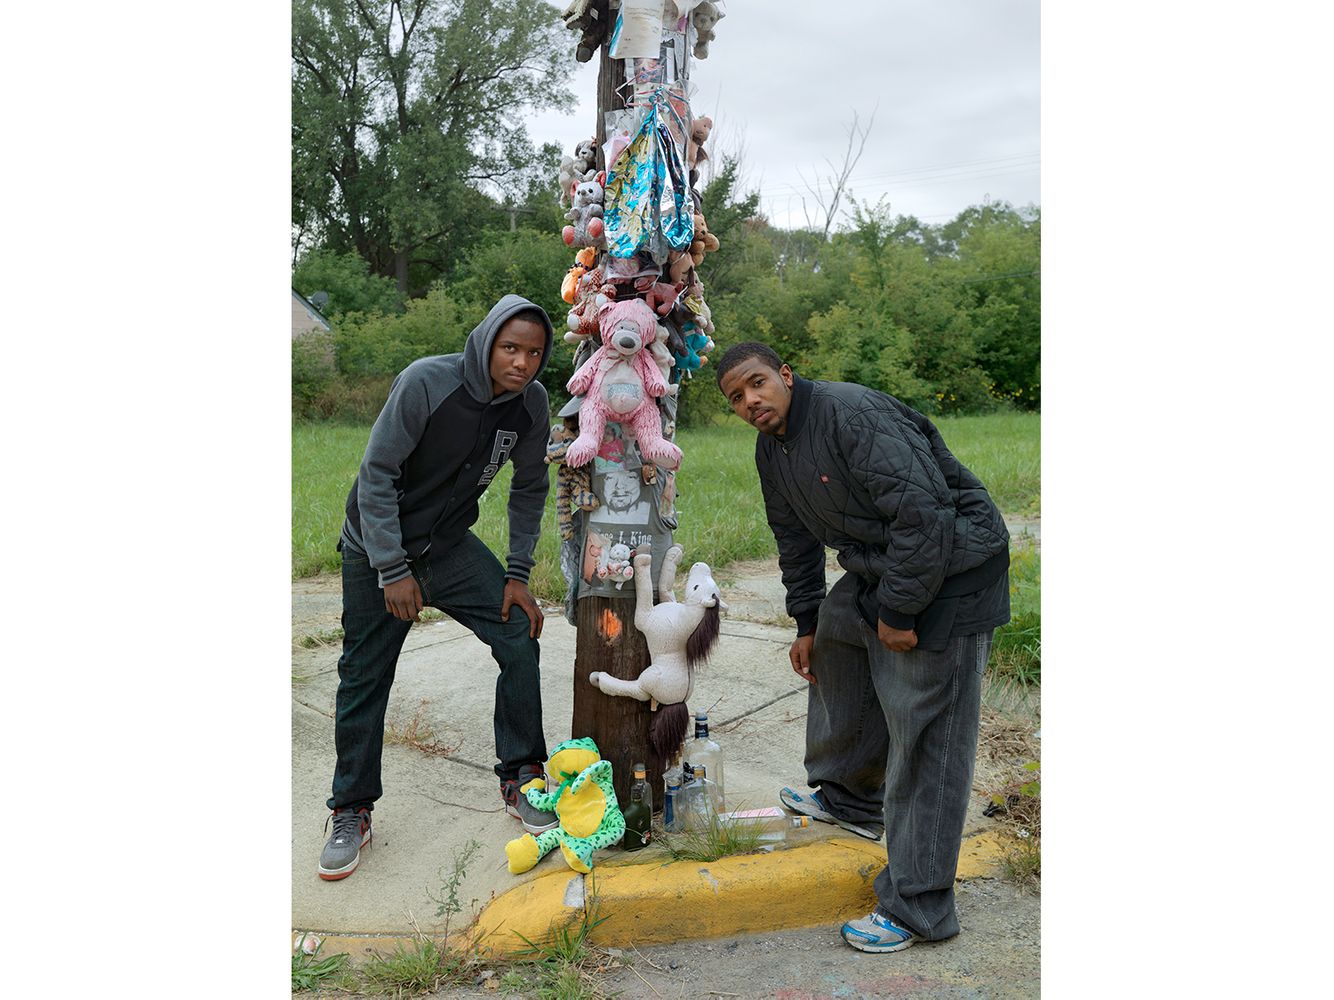 Two Men Pose in Front of a Memorial for their Deceased Friend, Eastside, Detroit 2014